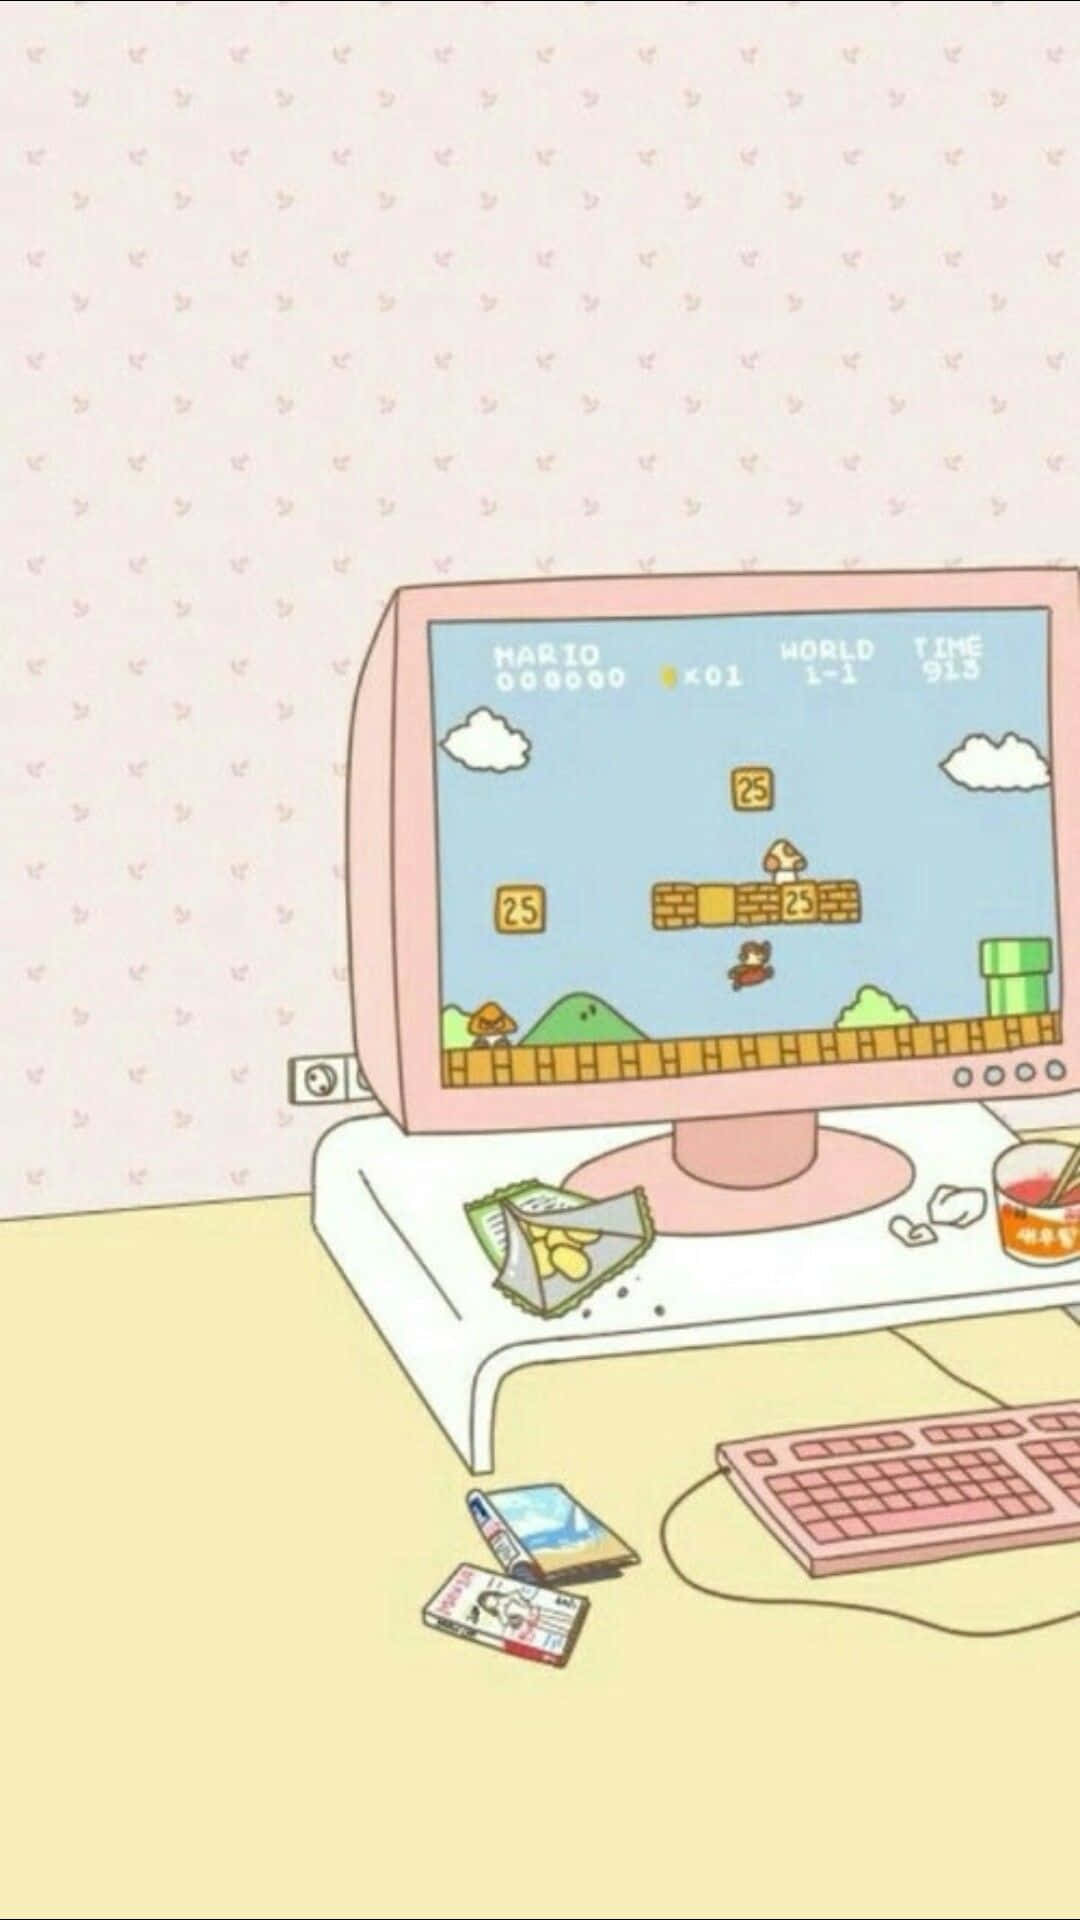 A Pink Computer With A Game On It